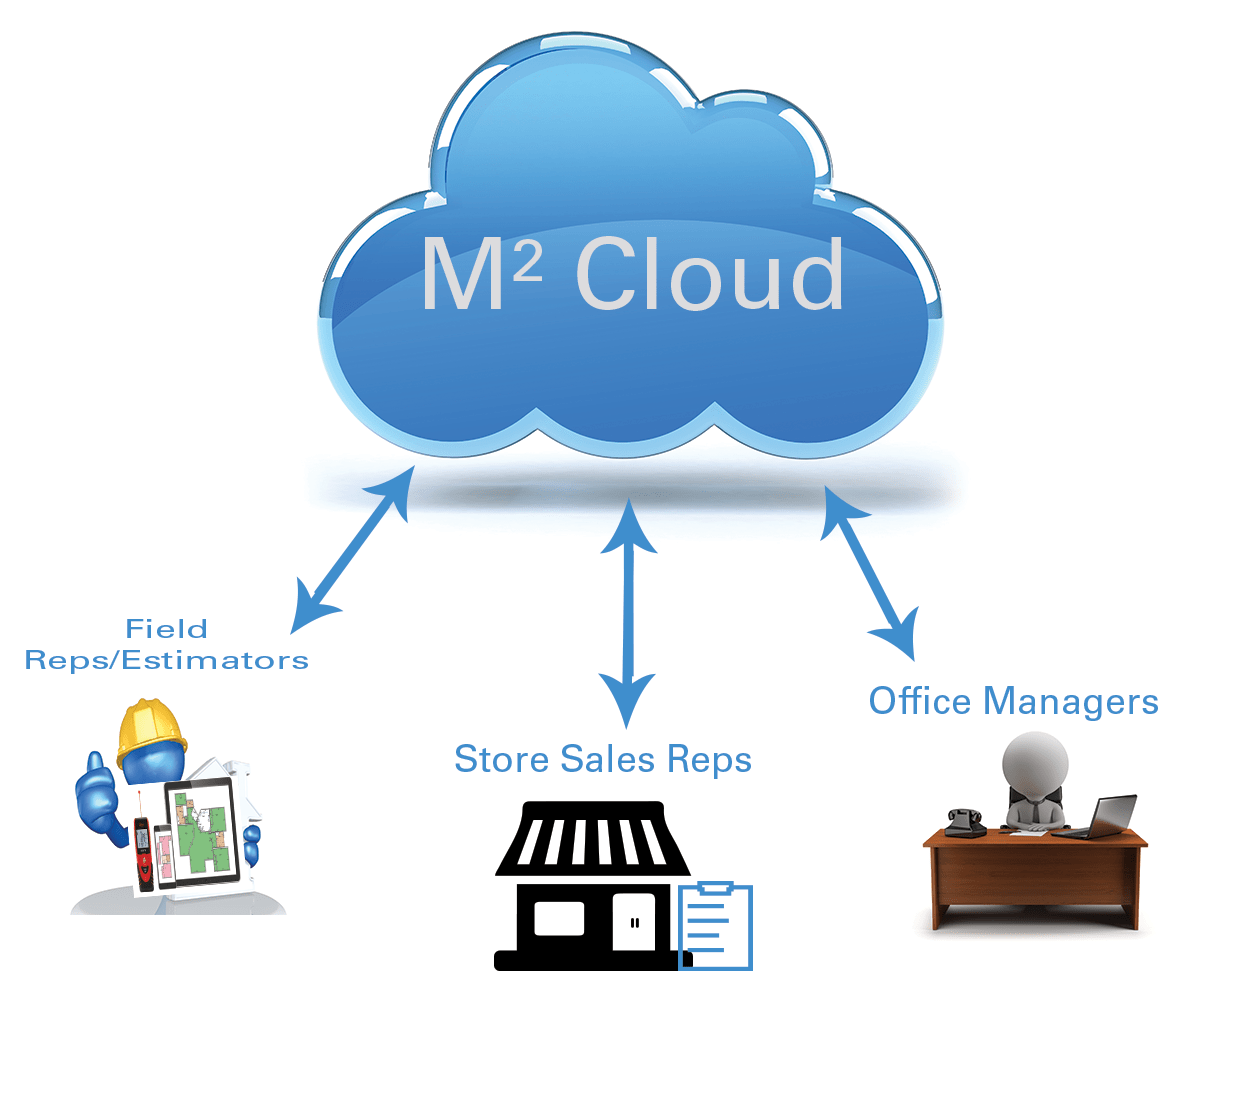 MS 2017 Transition: Setting Up An Account In The Cloud